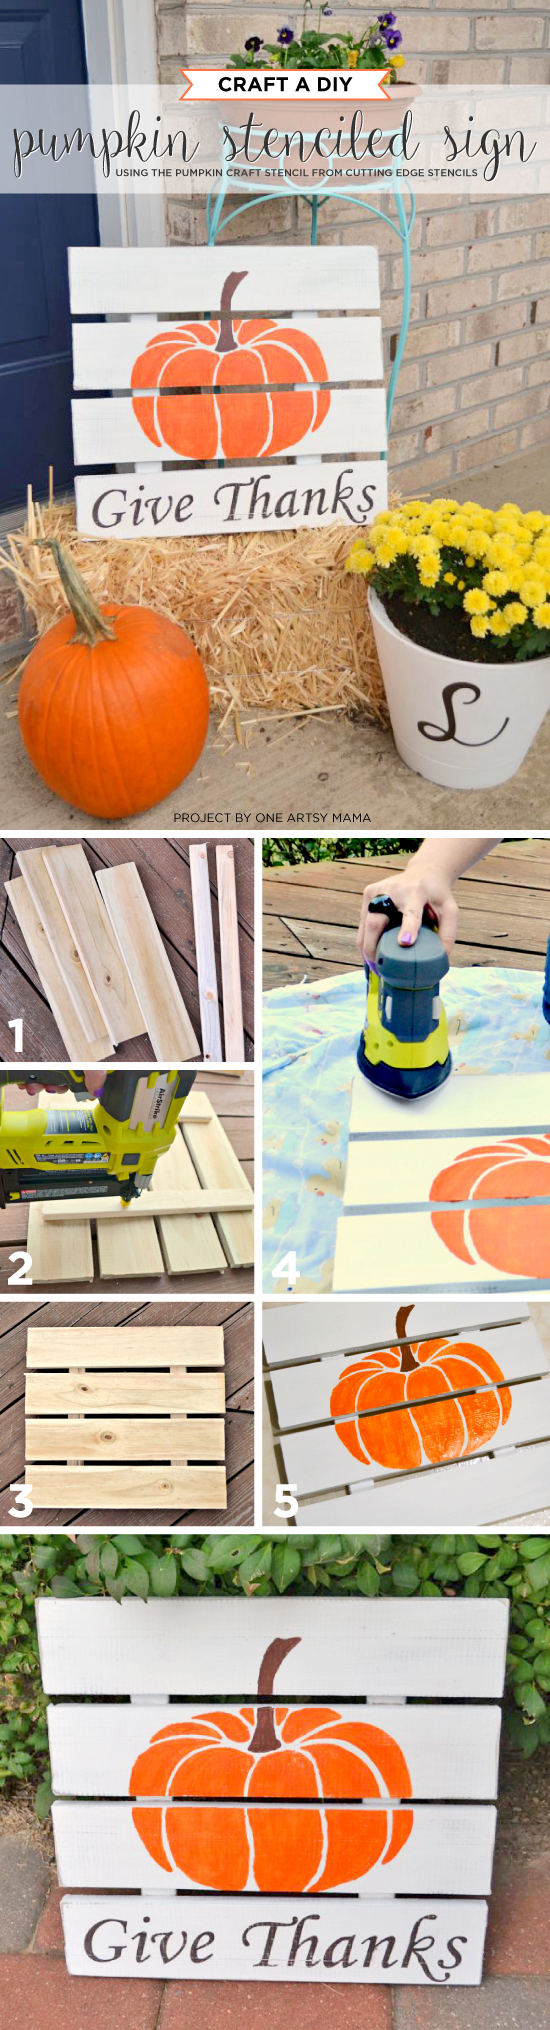 Cutting Edge Stencils shares how to create a DIY Fall inspired sign using the Pumpkin Craft Stencil. http://www.cuttingedgestencils.com/pumpkin-stencil-halloween-designs-for-accent-pillows-and-totes.html